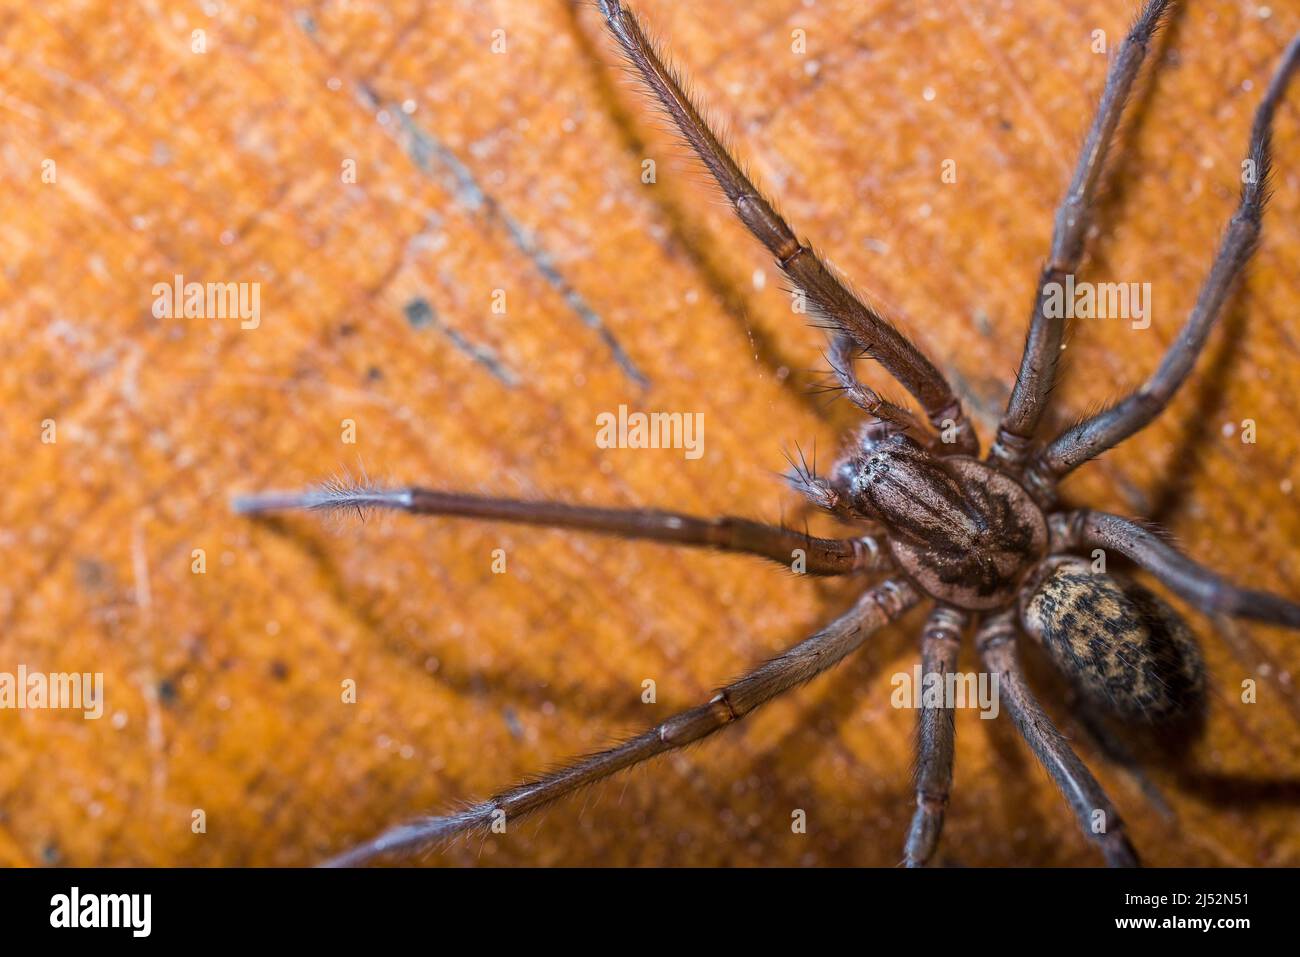 Tegenaria domestica, commonly known as the barn funnel weaver in North America and the domestic house spider in Europe. Stock Photo